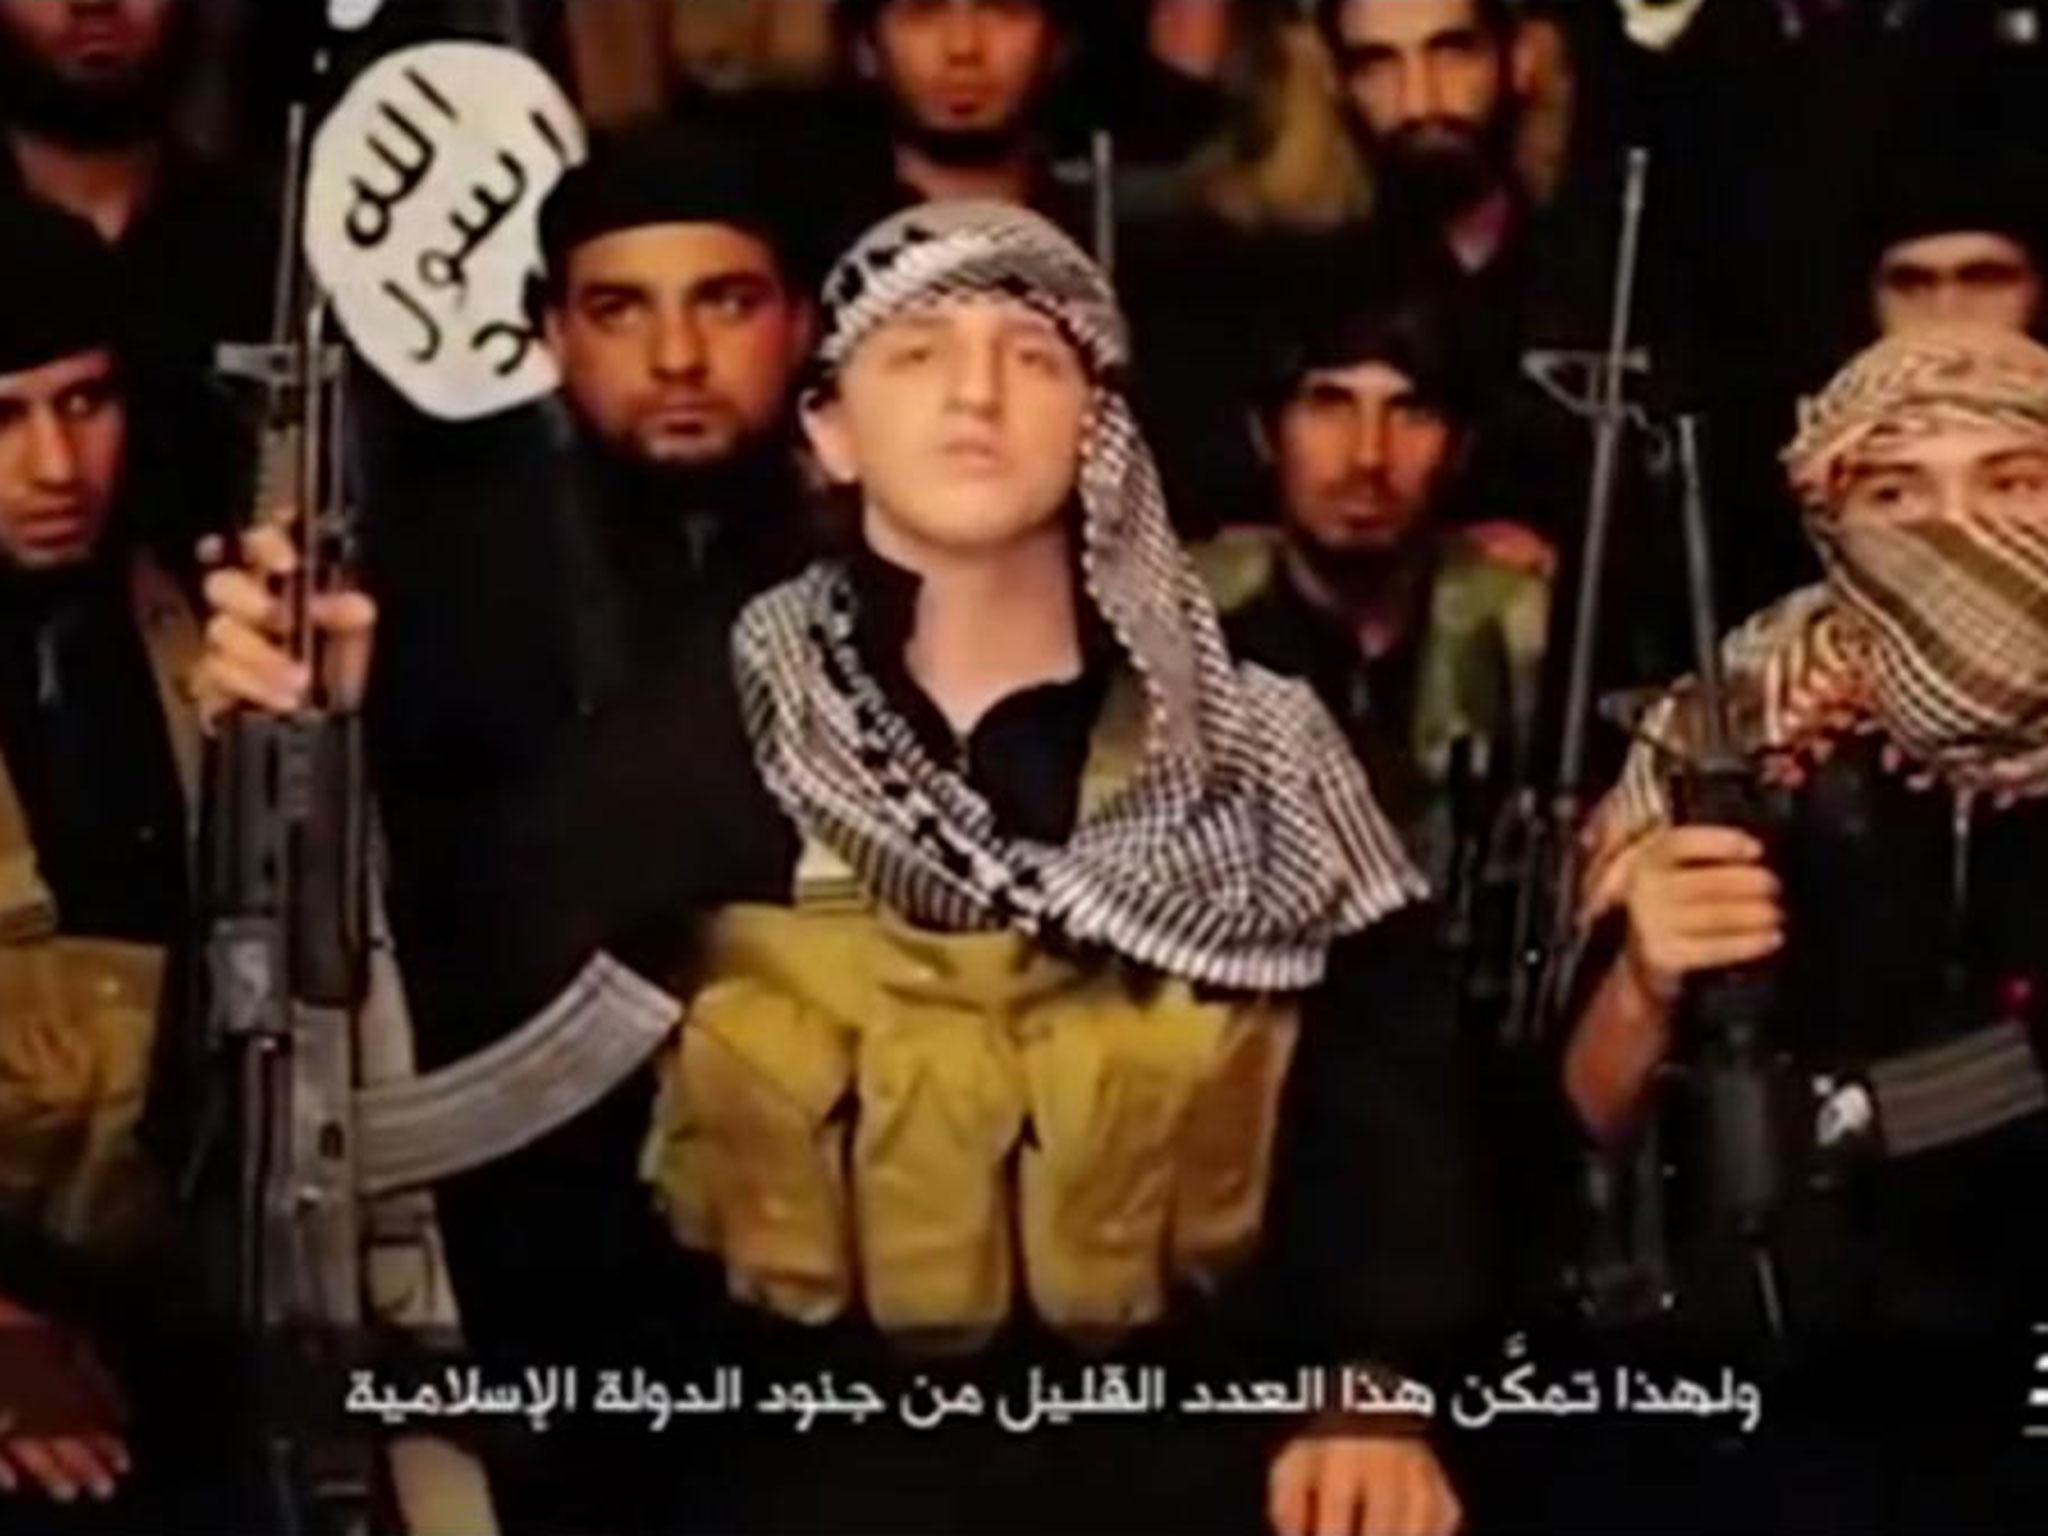 A screenshot from an Isis propaganda video posted online